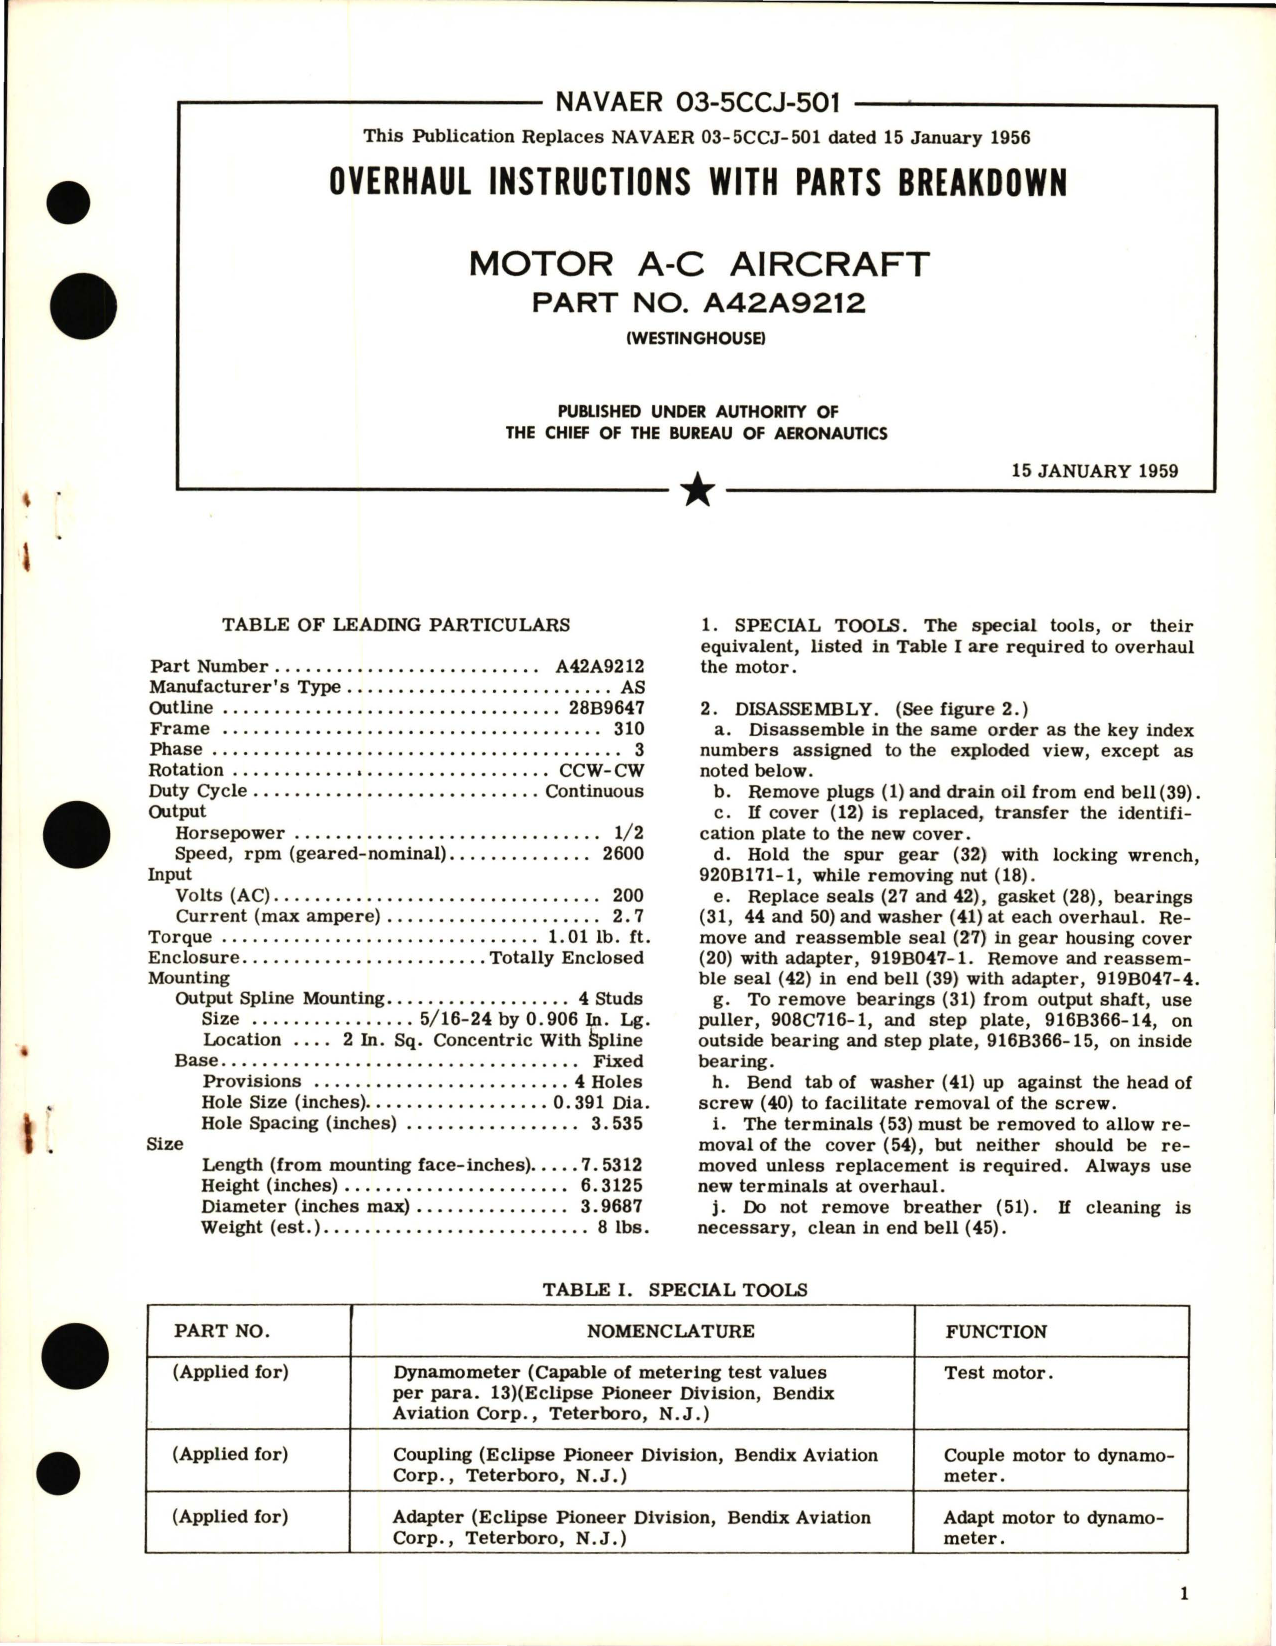 Sample page 1 from AirCorps Library document: Overhaul Instructions with Parts Breakdown for Motor A-C Aircraft - Part A42A9212